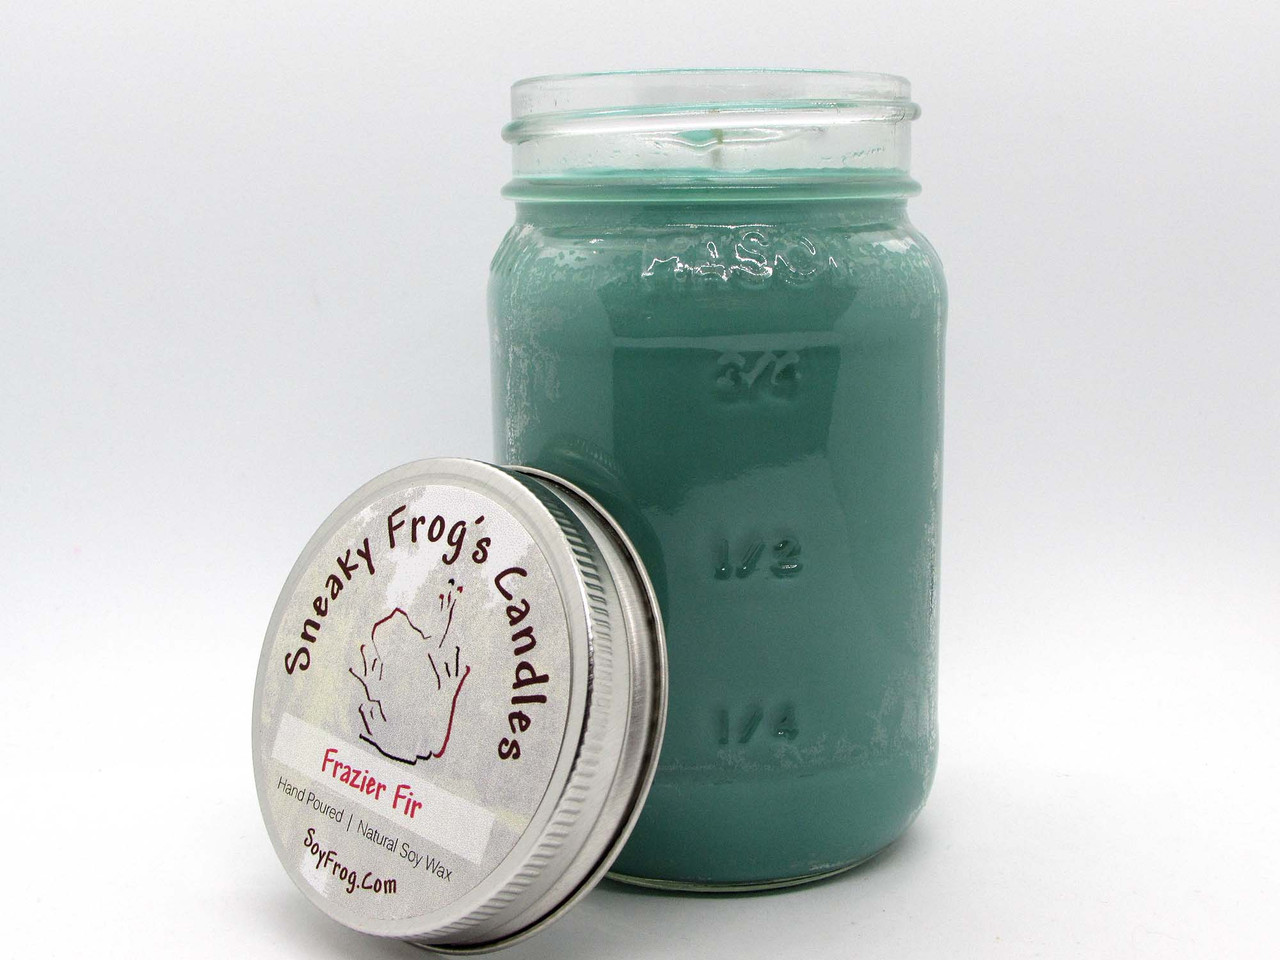 Frazier Fir Scented Natural Soy Wax Candles